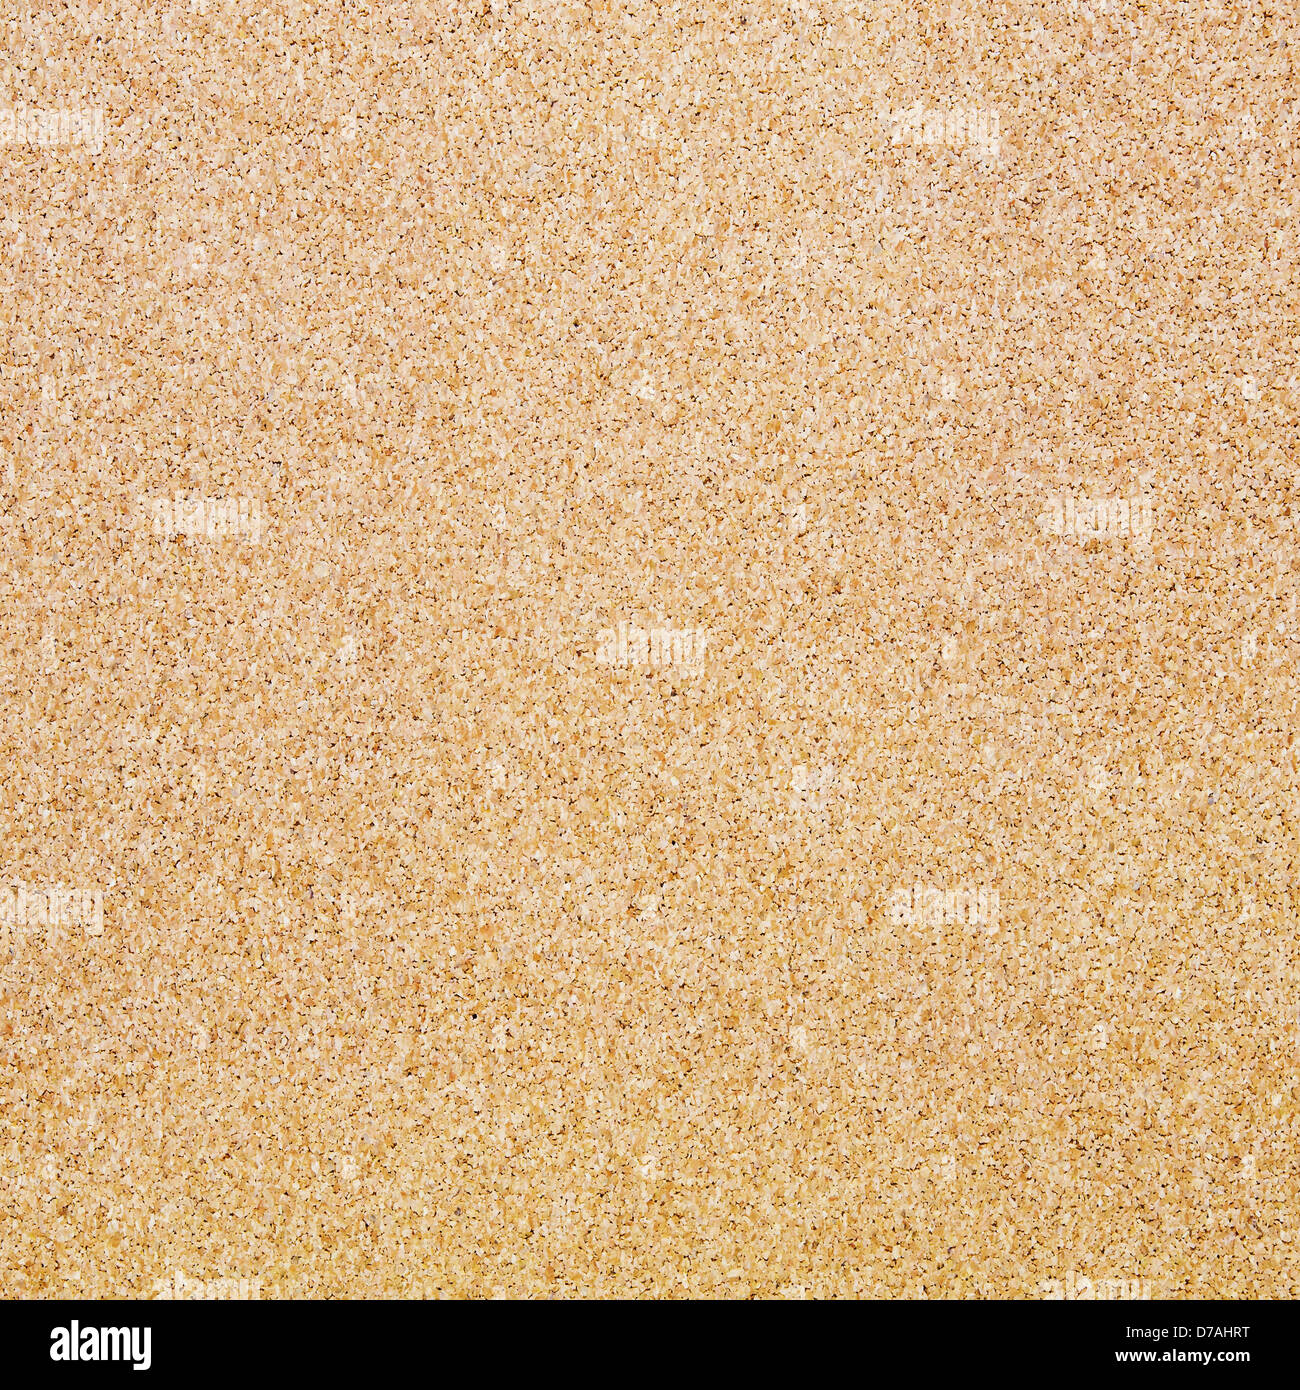 Blank cork pin board texture or background Stock Photo